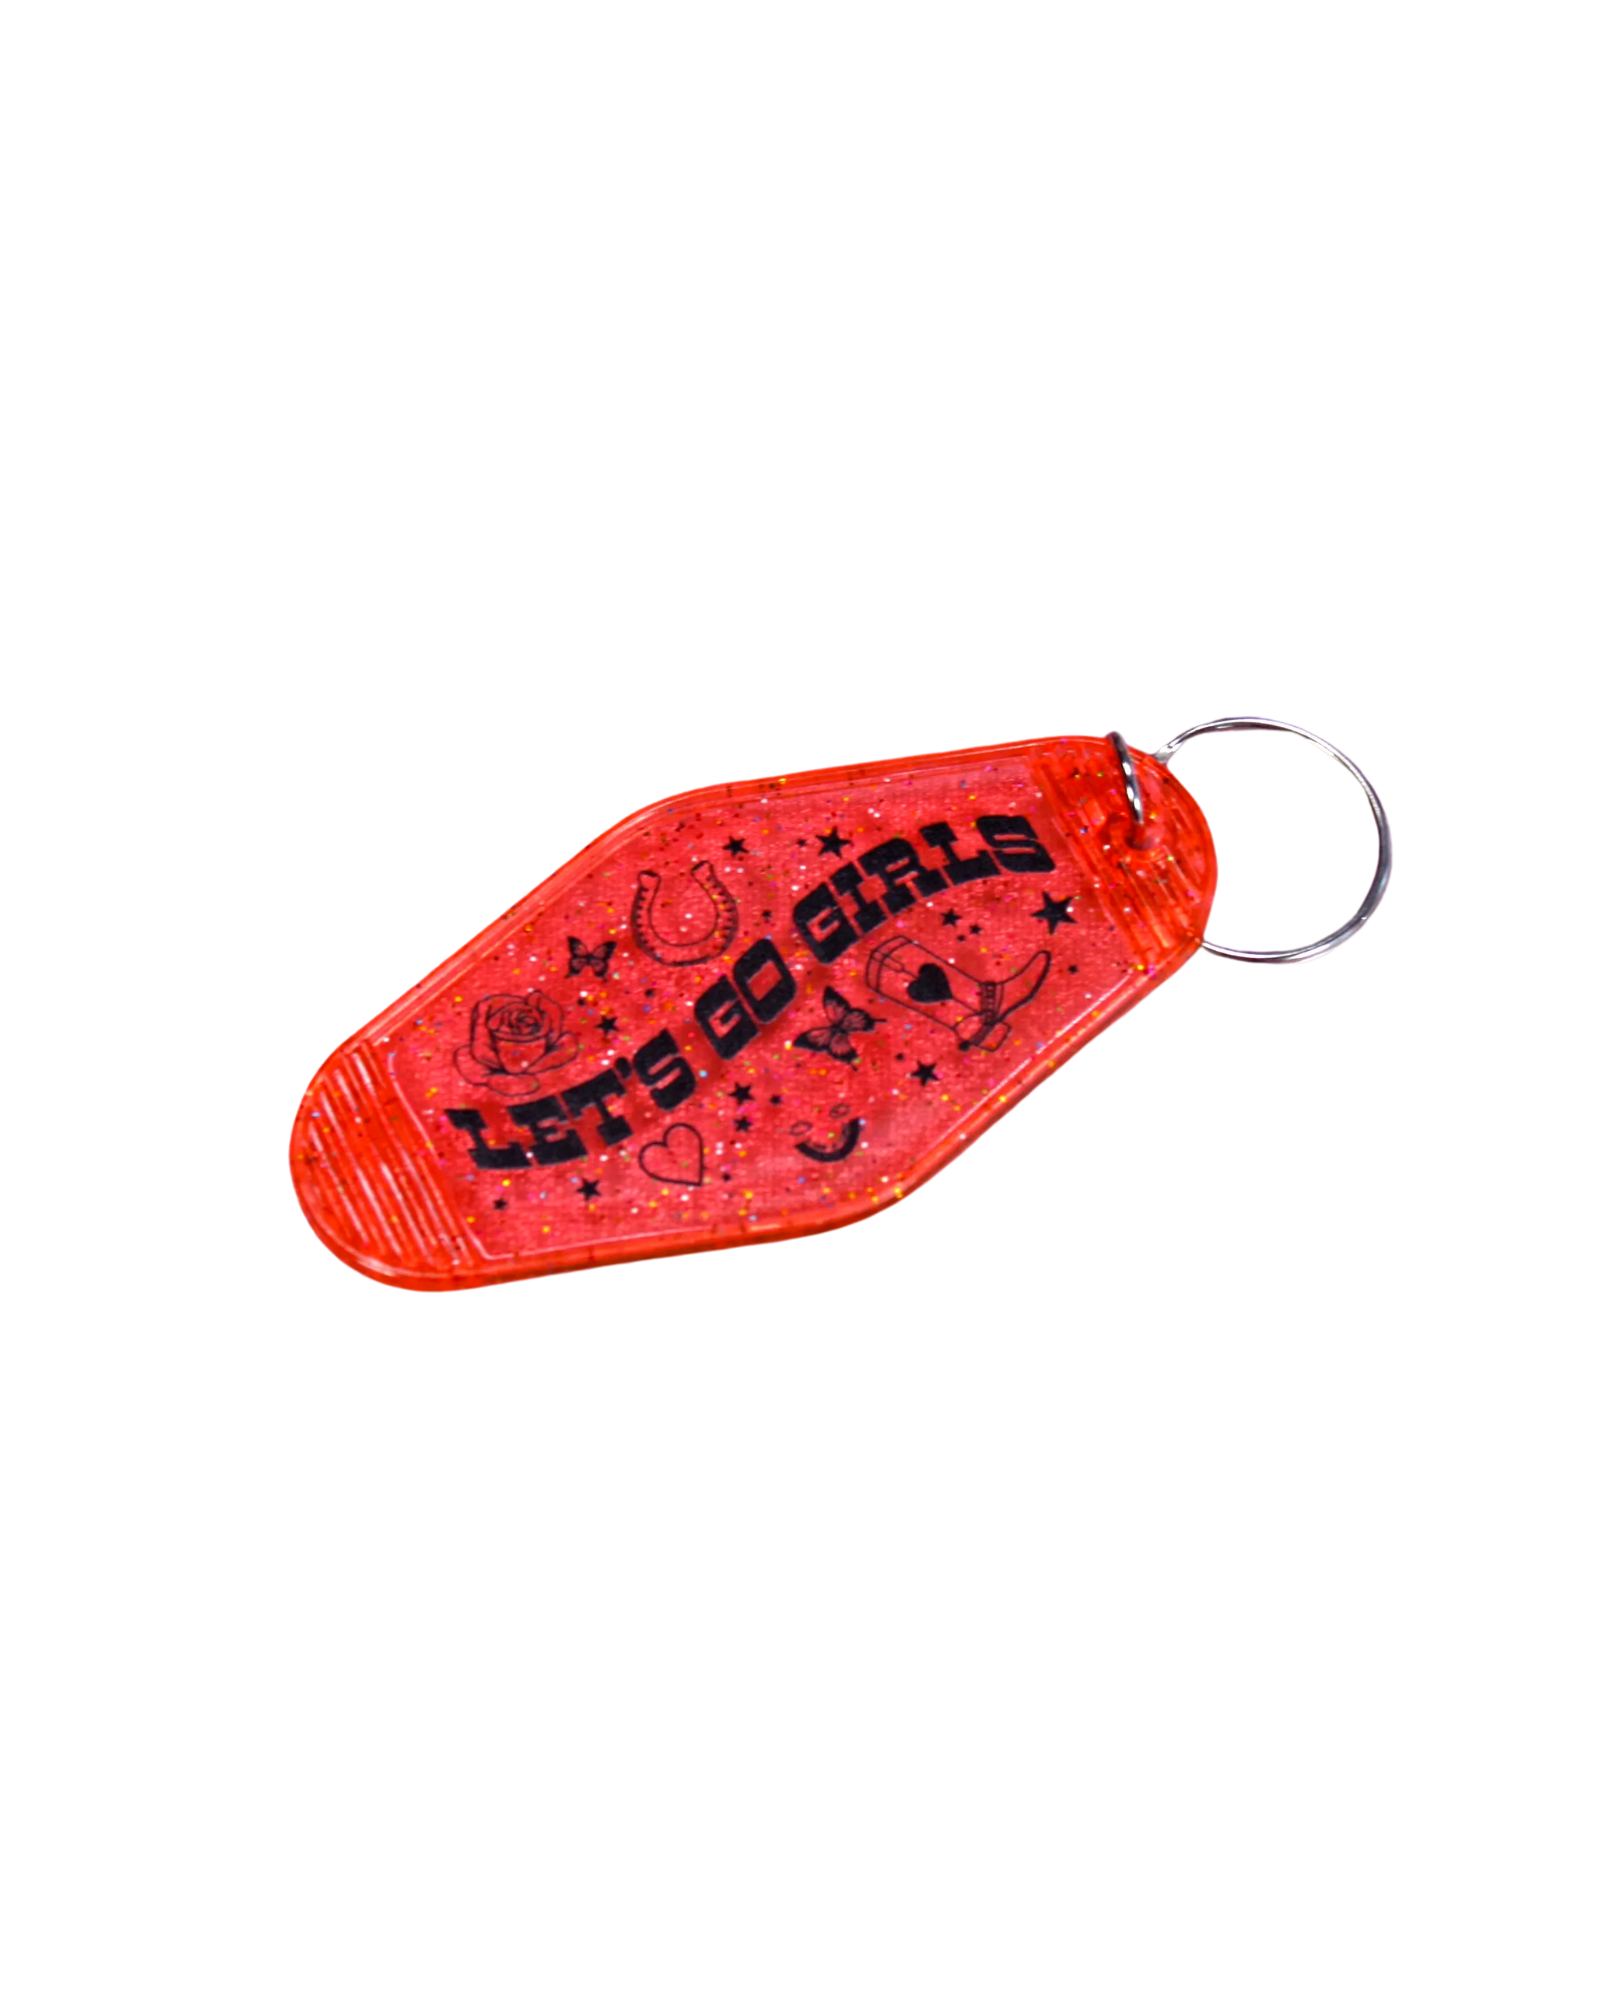 Clear red sparkly vintage motel style keychain with the words let's go girls with western doodles around the words